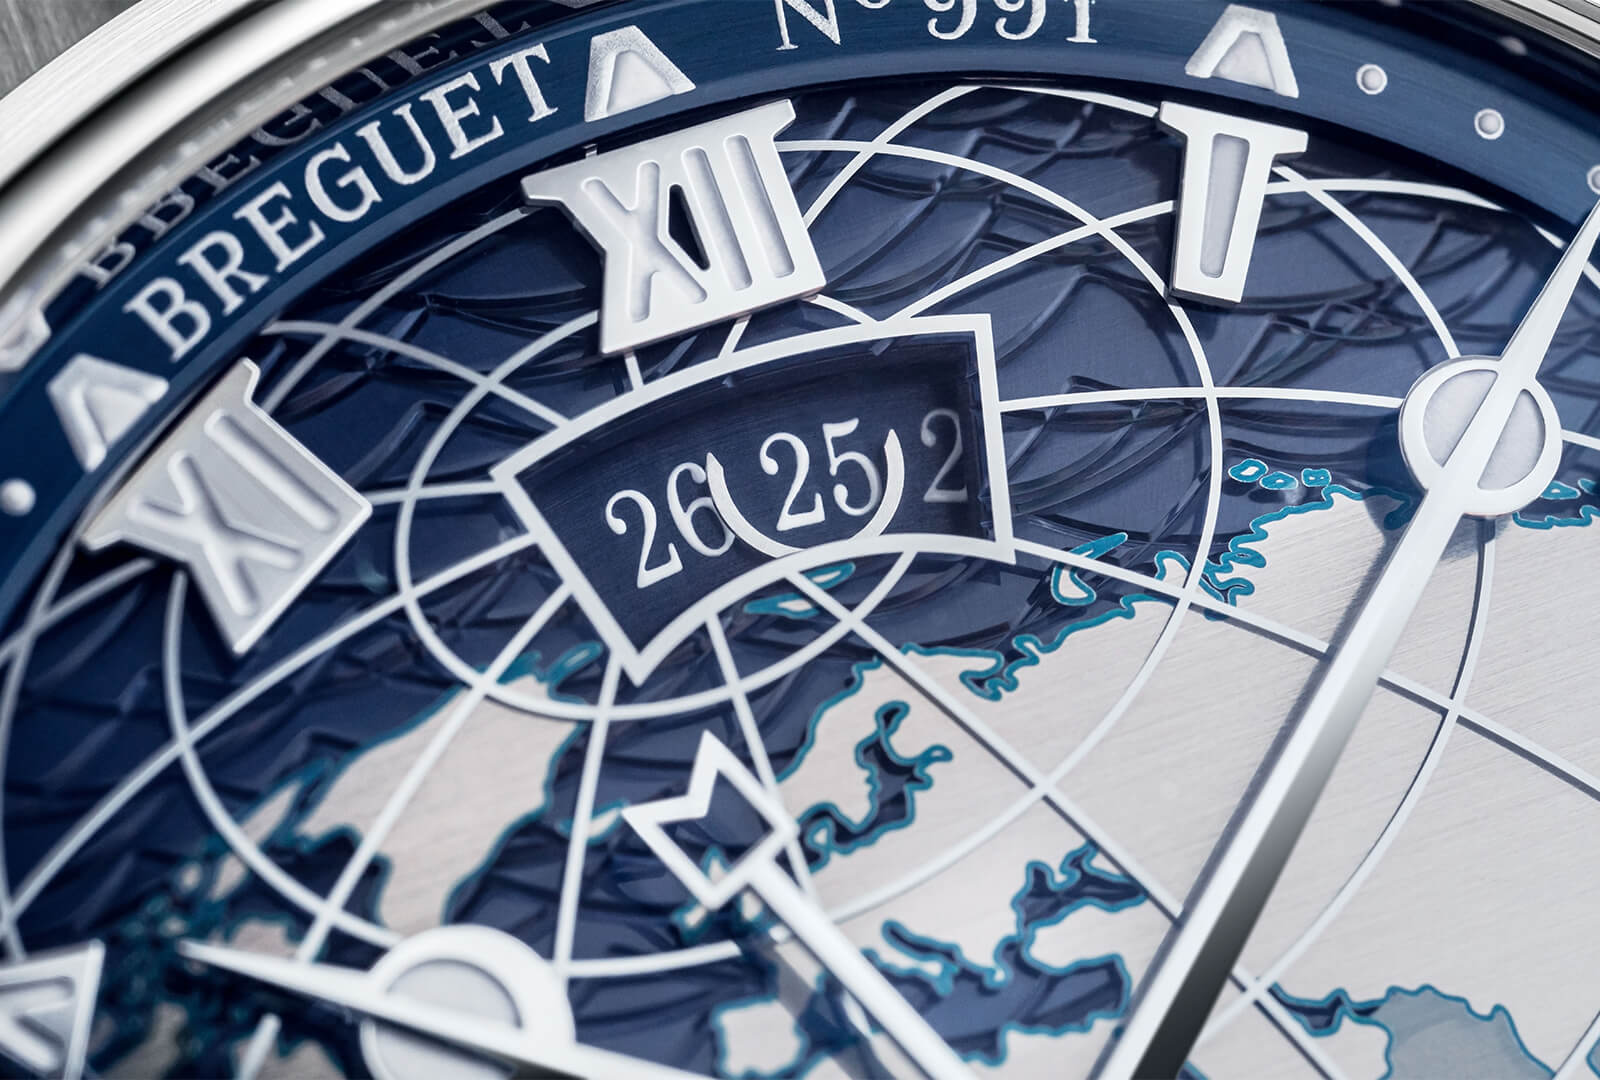 The Breguet Marine Hora Mundi 5557. Click here to find out more.